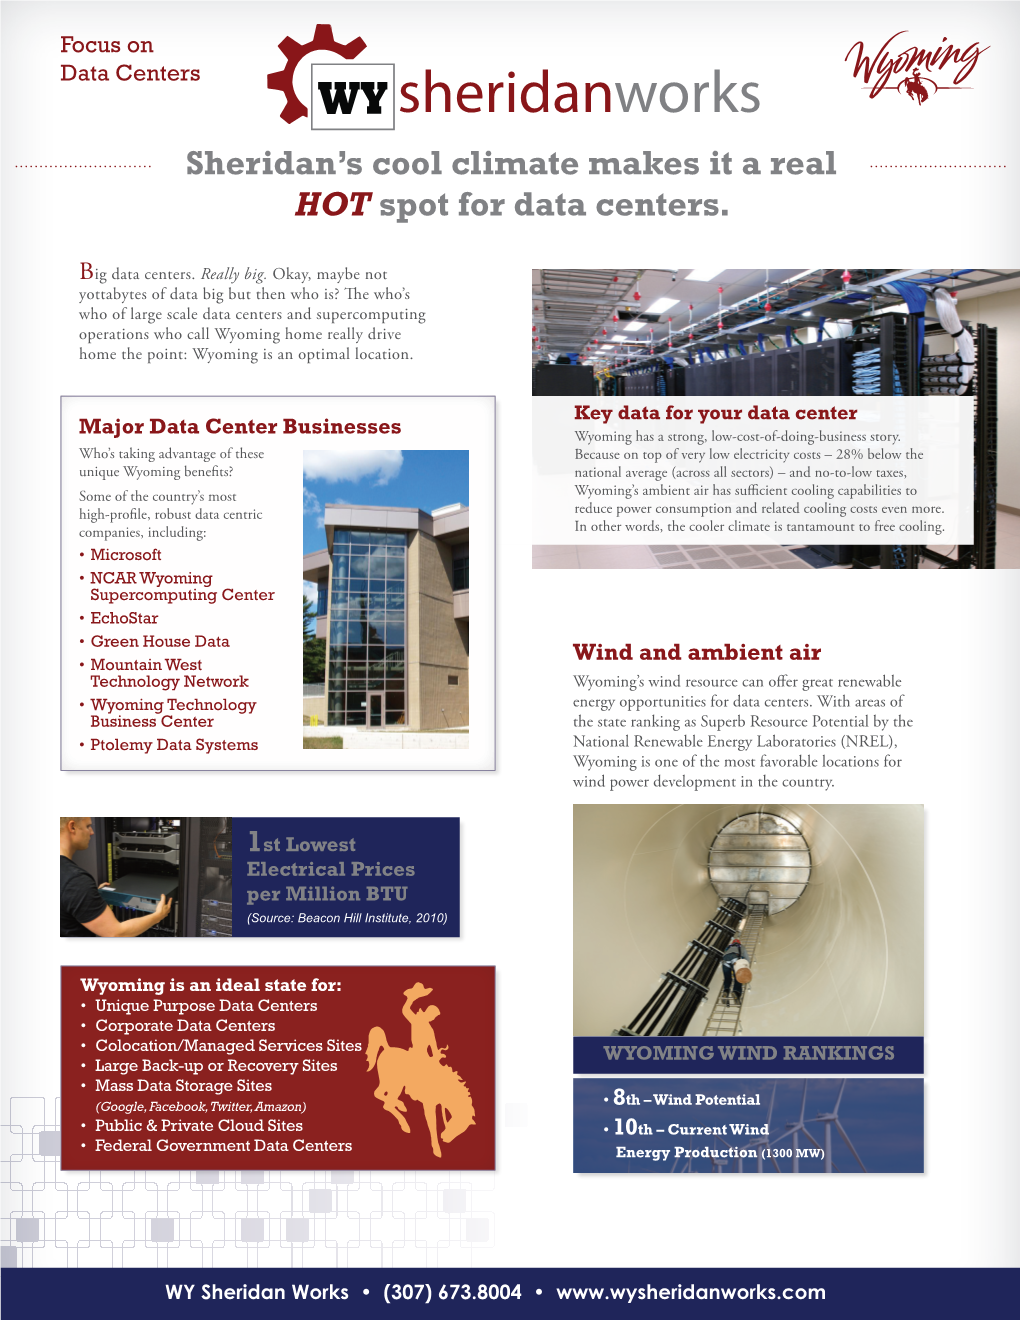 Sheridanworks Sheridan’S Cool Climate Makes It a Real HOT Spot for Data Centers